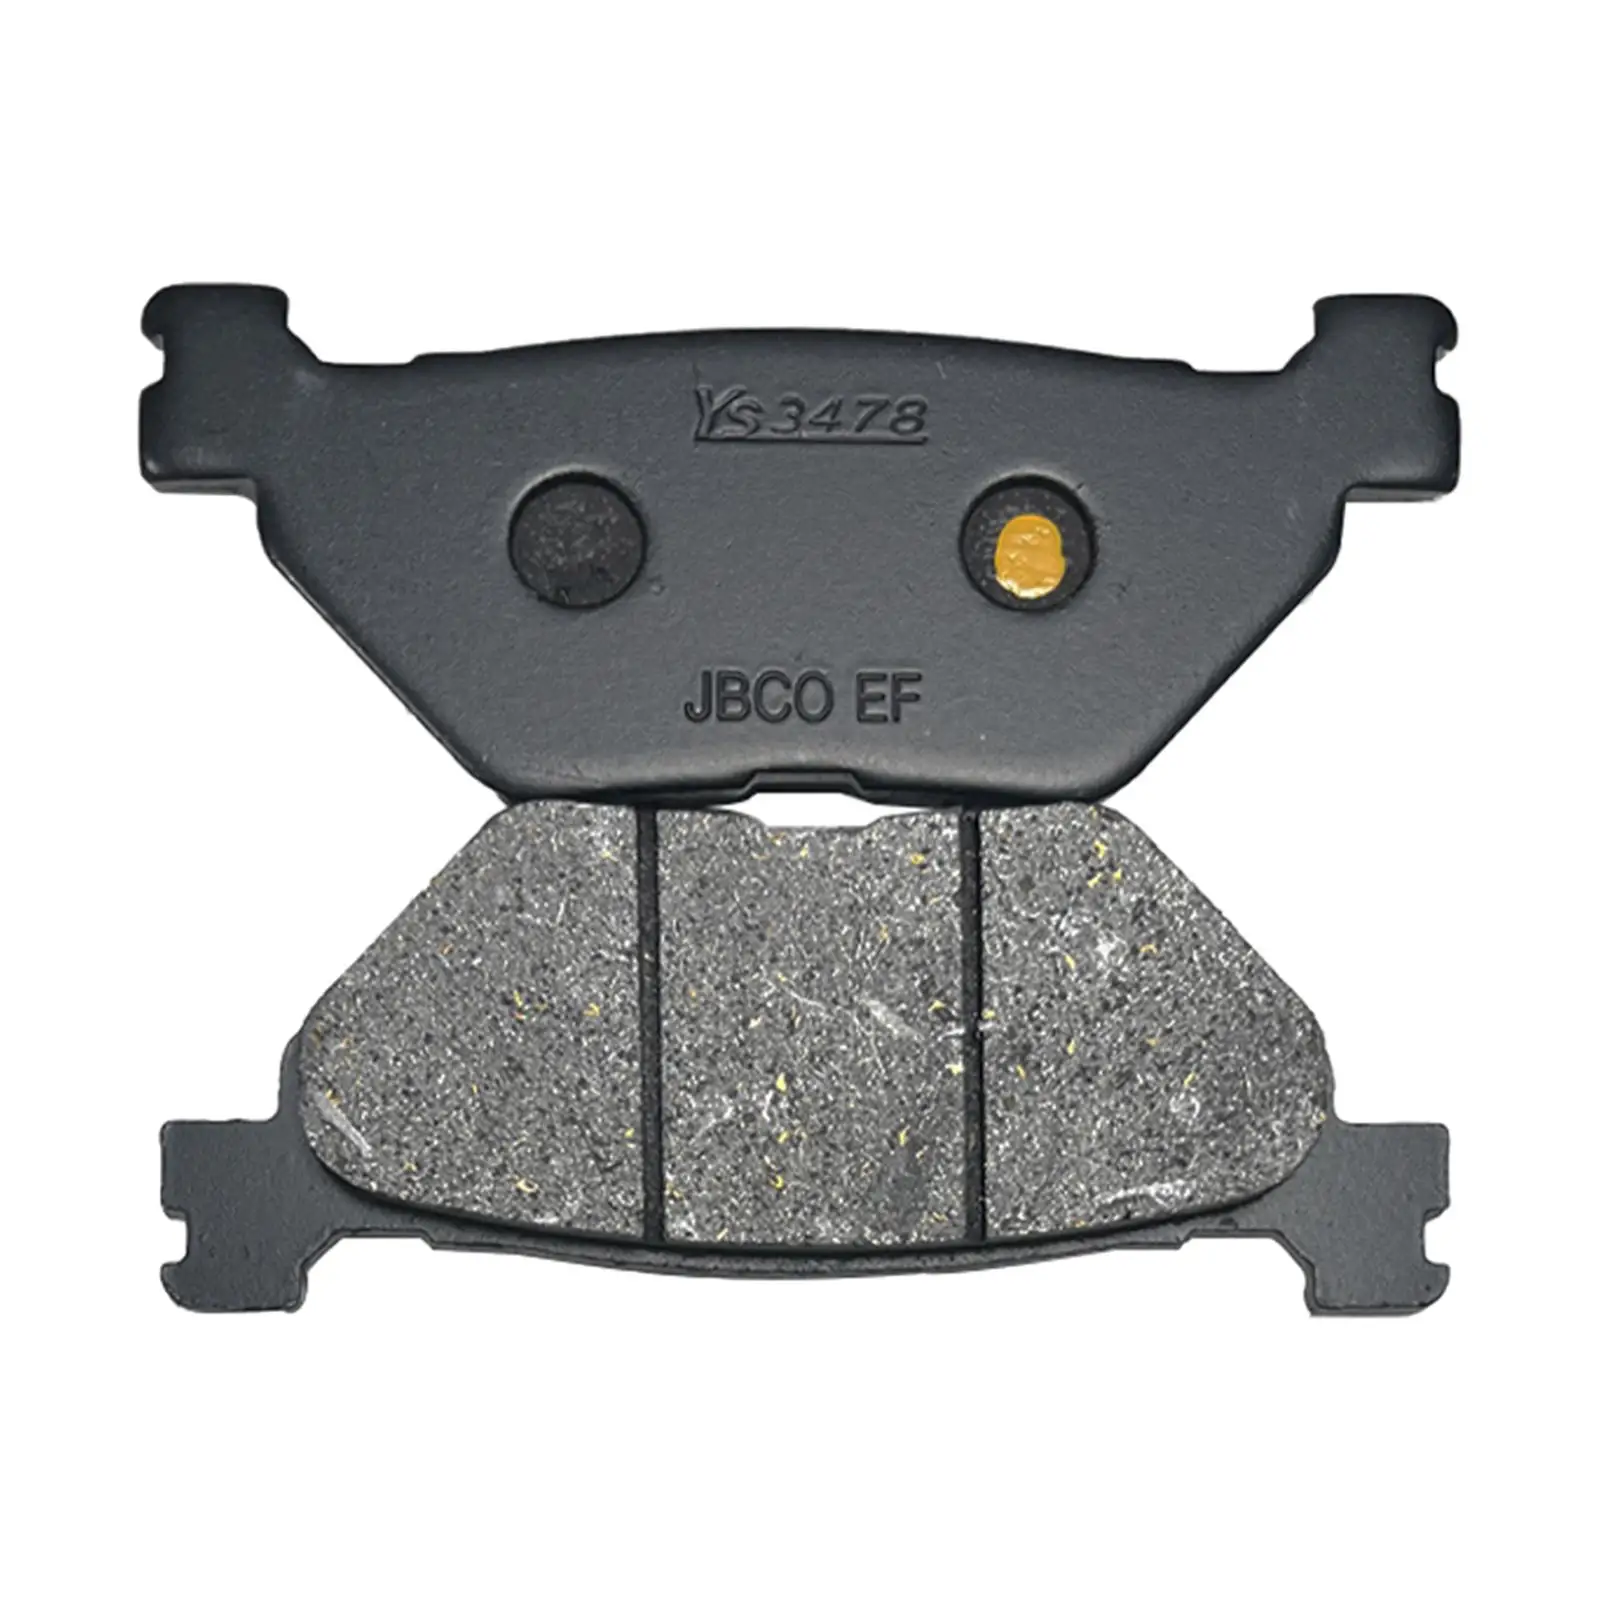 Replacements Brake Pads Accessory for XP 530 Tmax Durable Professional